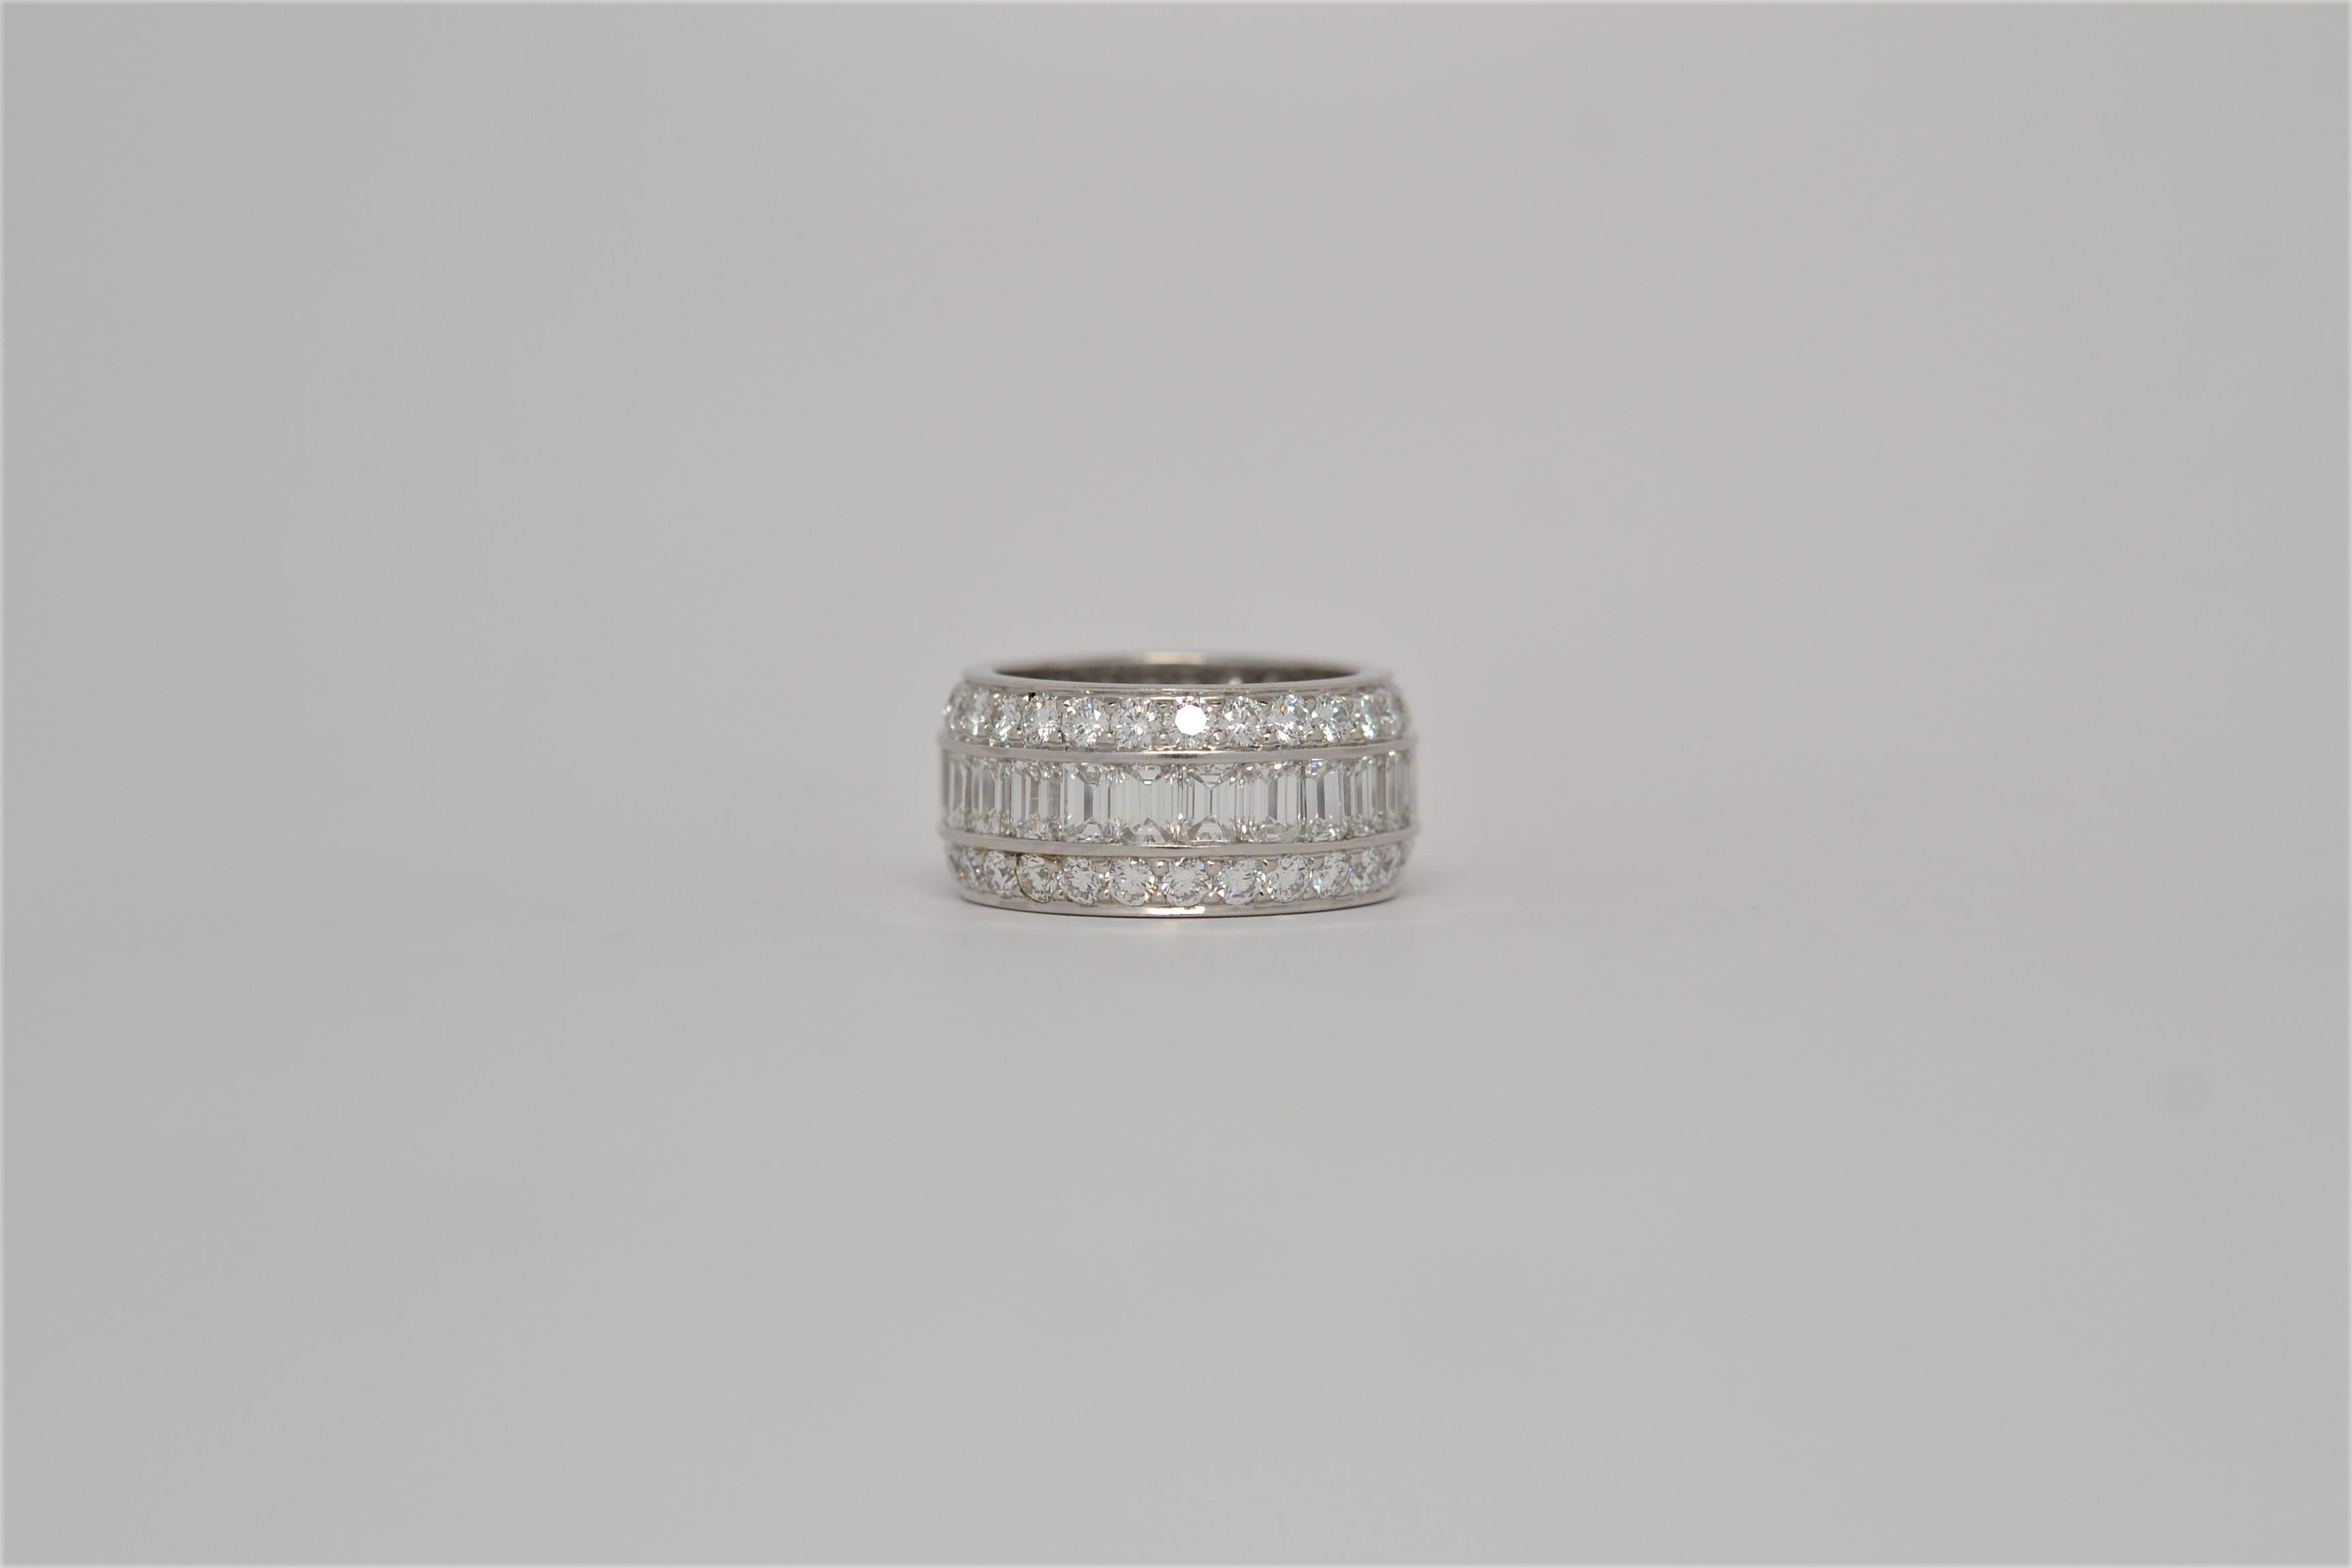 A unique three row Platinum and Diamond wedding band. The handmade Platinum ring is set all the way around with diamonds in an eternity style layout. A center row of channel set Emerald Cut Diamonds is accented by two rows of Round Brilliant Cut